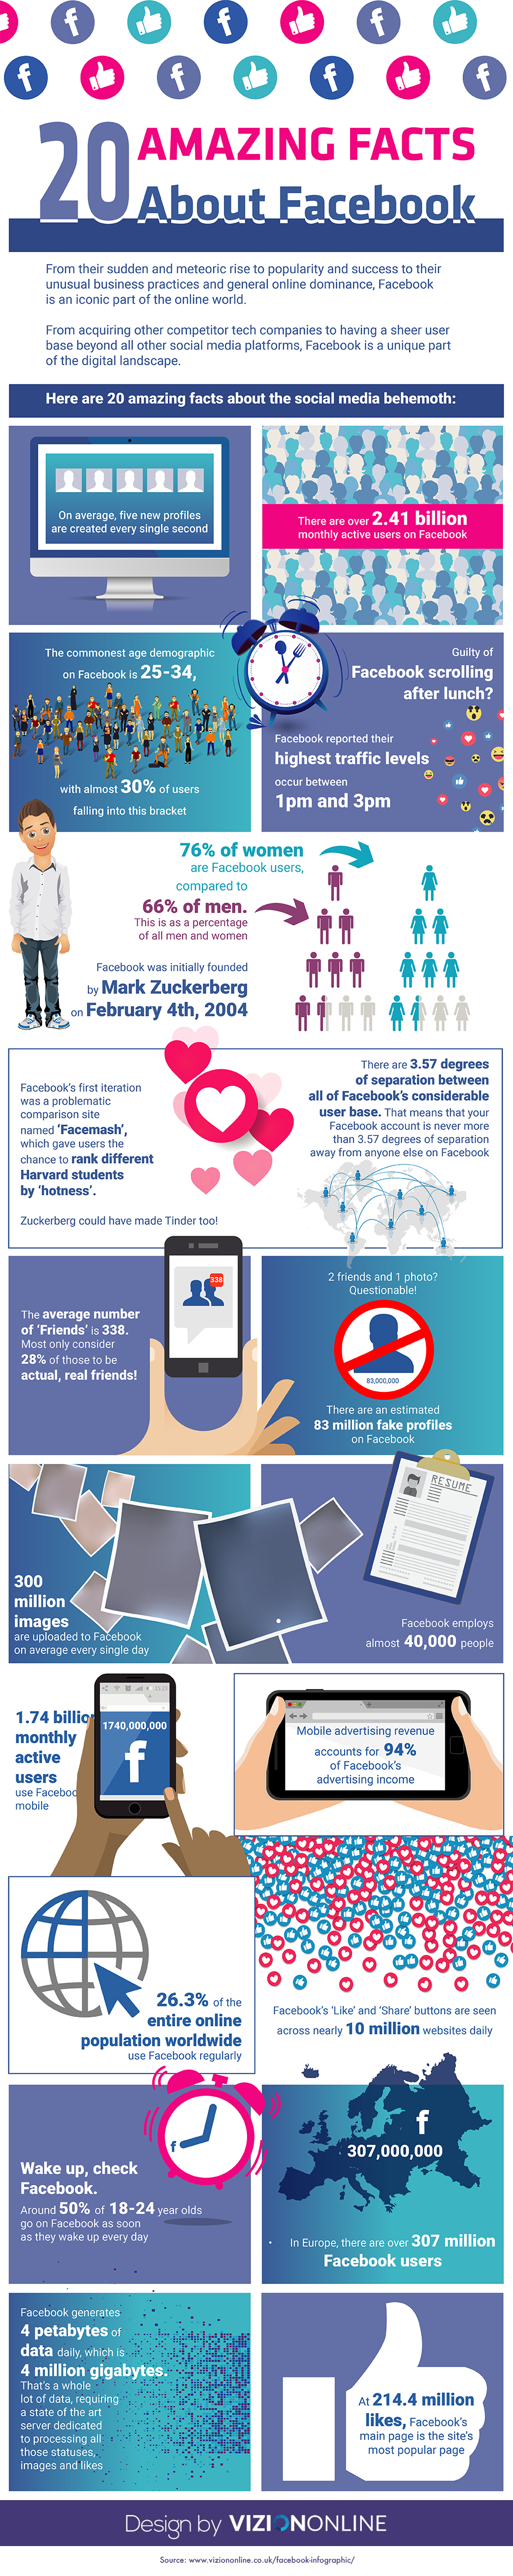 20 Amazing Facts About Facebook - Infographic